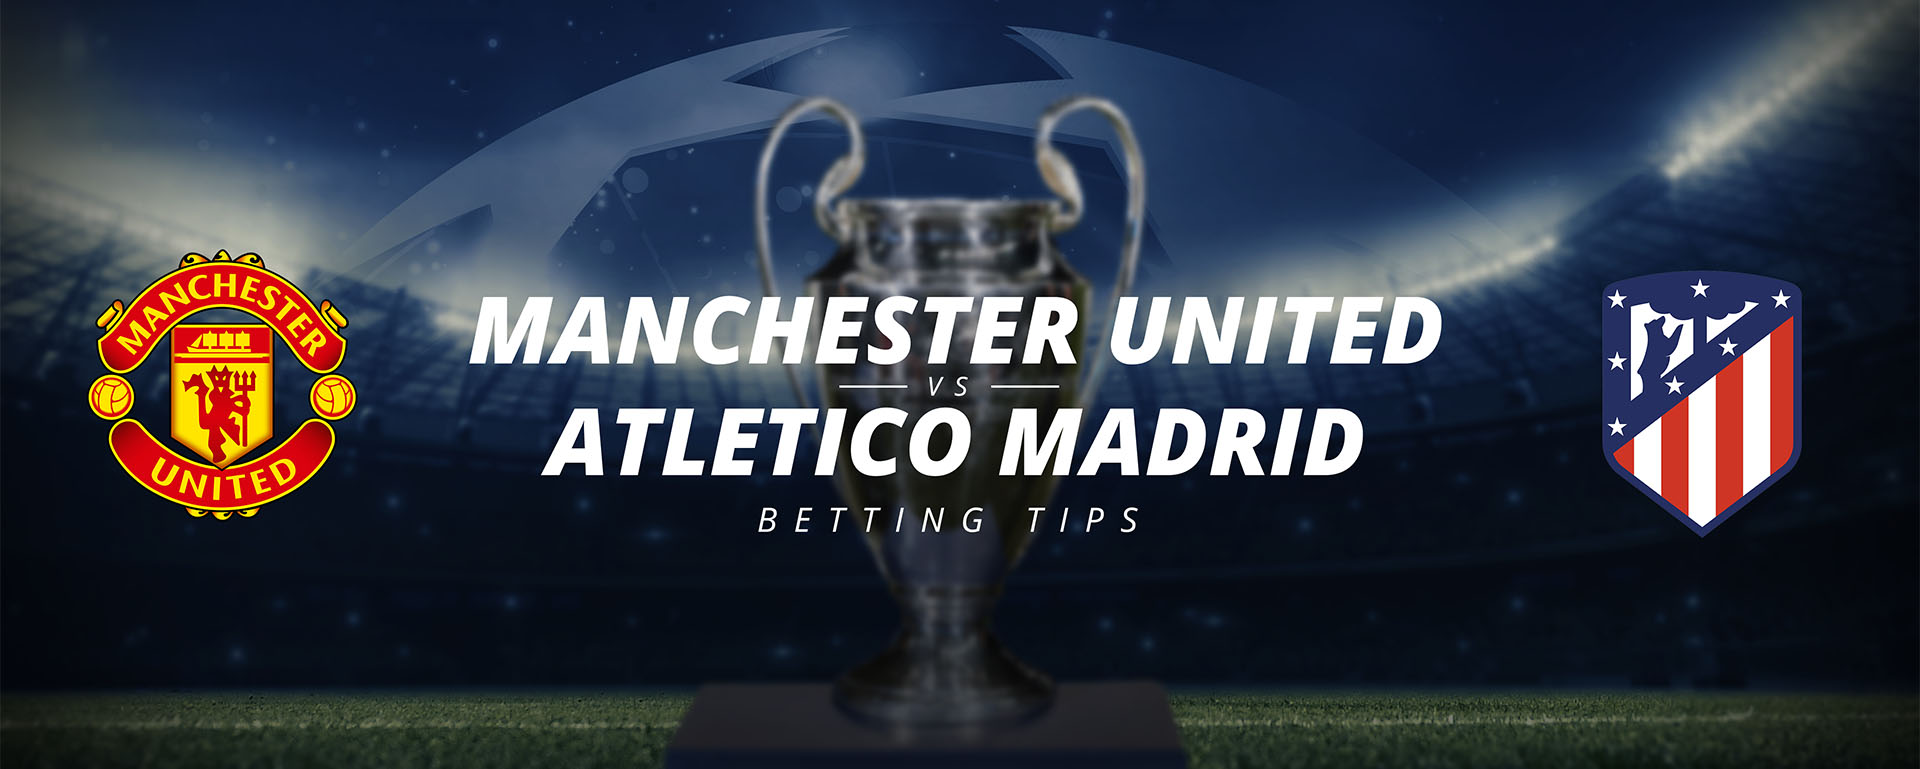 MANCHESTER UNITED VS ATLETICO MADRID: BETTING TIPS